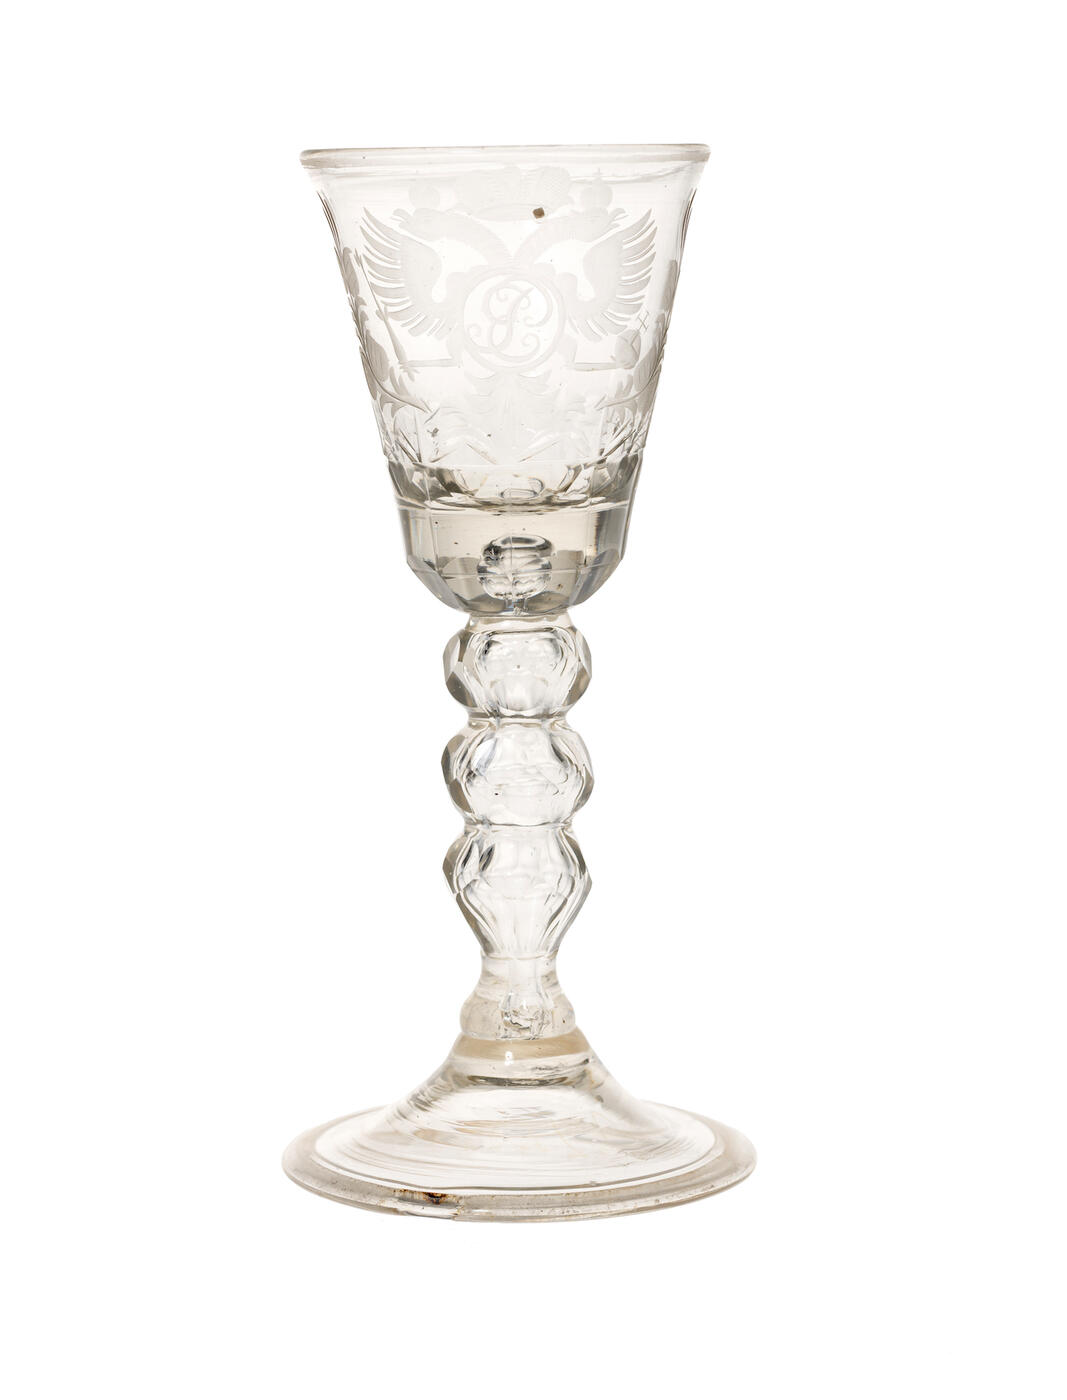 An Engraved Wine Glass